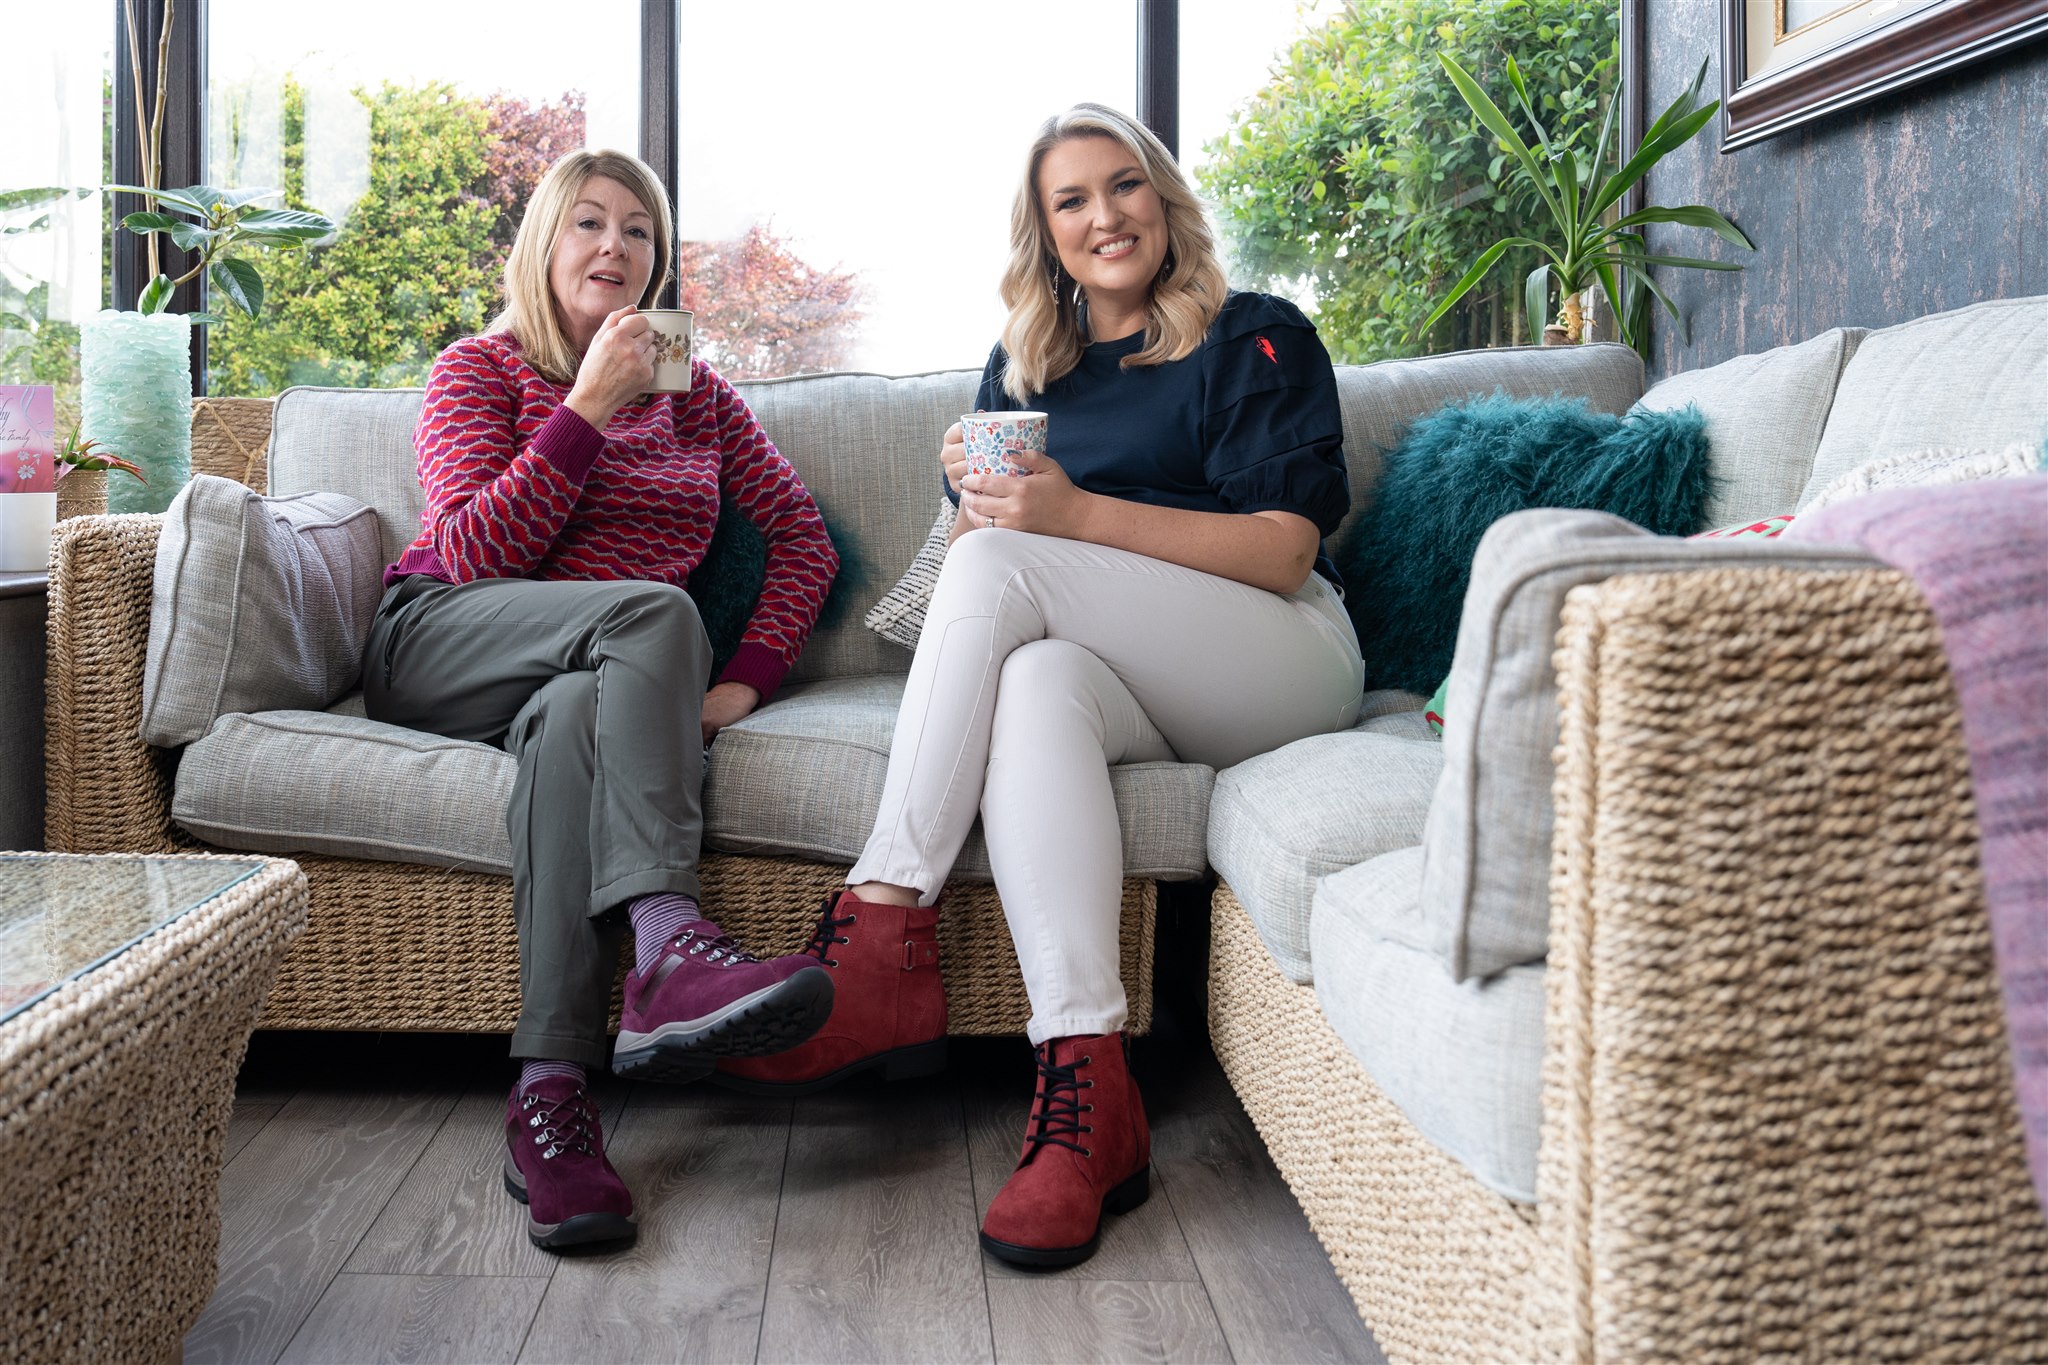 Celebrating Comfort and Style: Sara Davies MBE Champions ‘Joyful Strides for Wider Feet’ Campaign alongside Loyal Customers